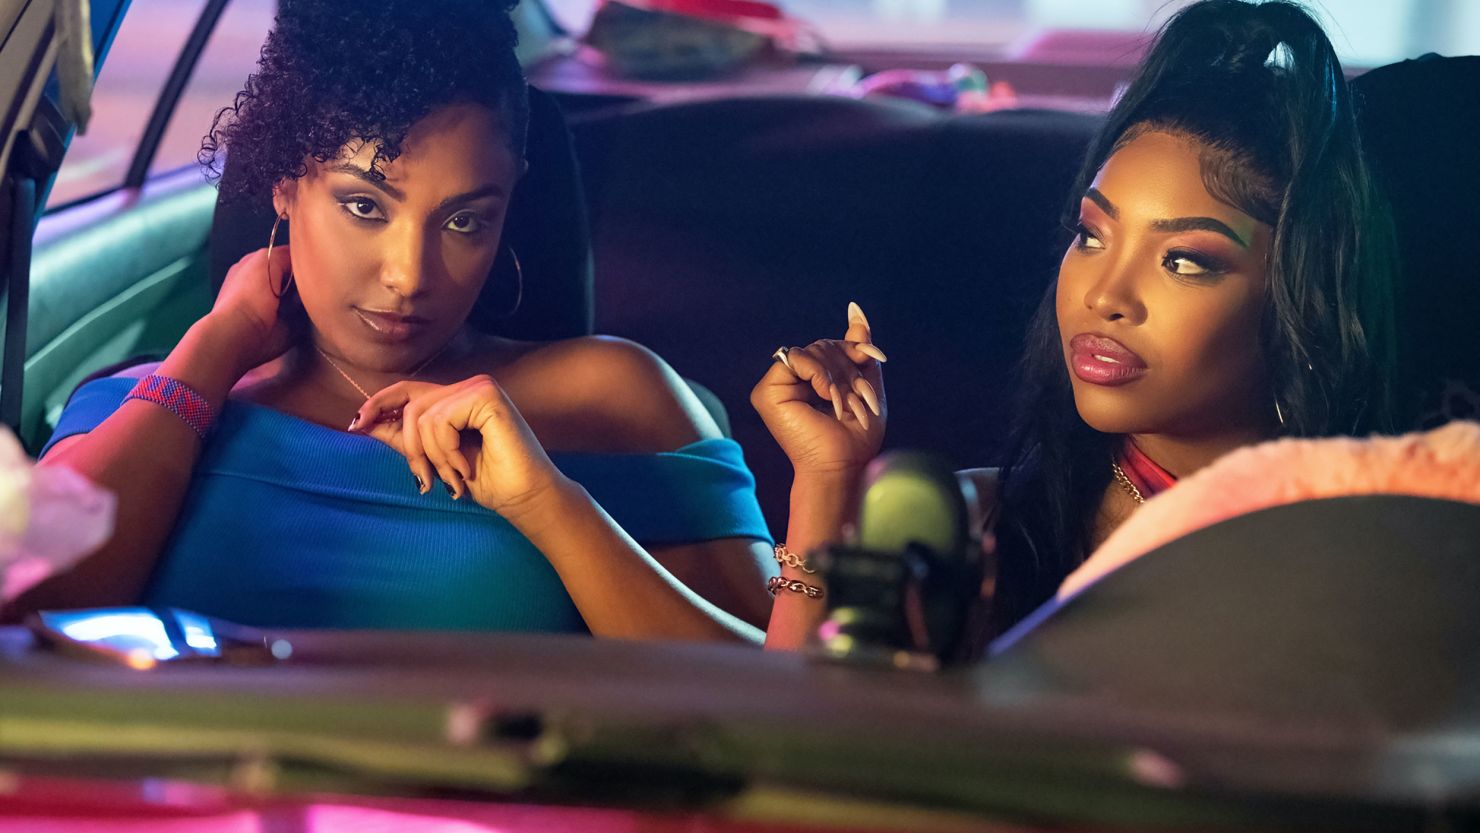 Aida Osman and KaMillion star in "Rap Sh!t," an HBO Max show about two Miami rappers on the come up.